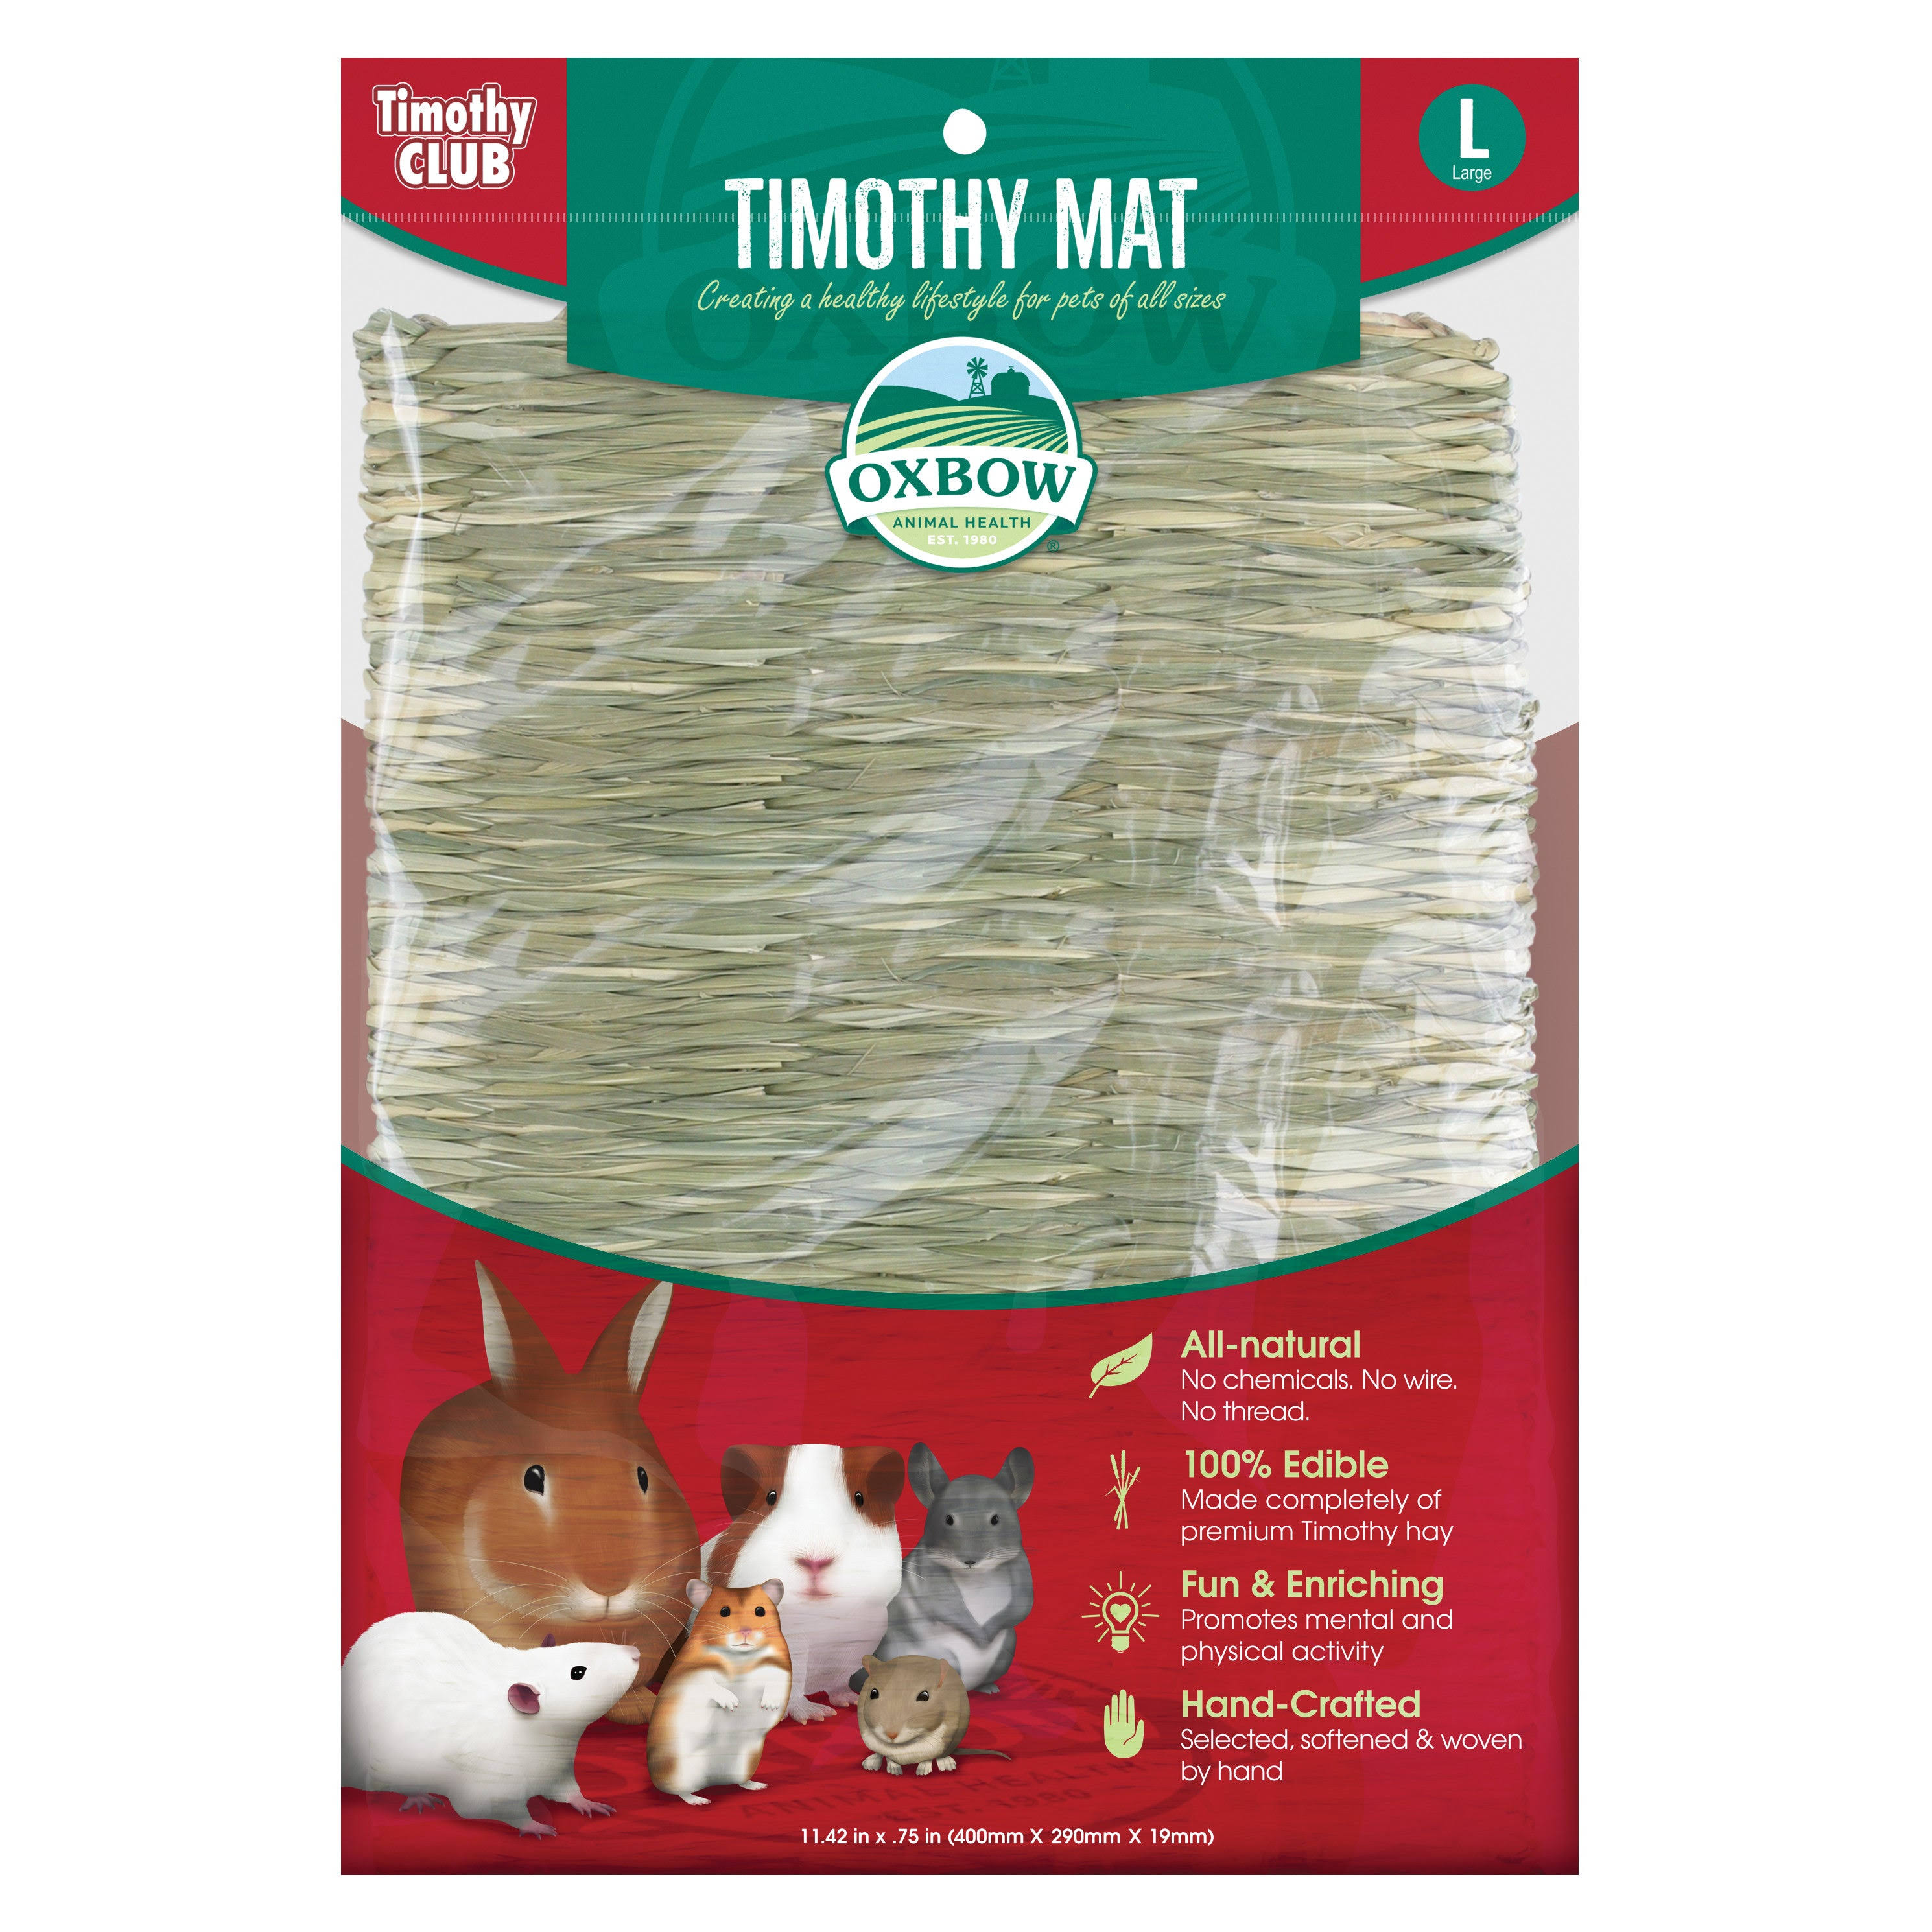 Oxbow Animal Health Grassy Grass Woven Timothy Hay Mat for Pets - Large